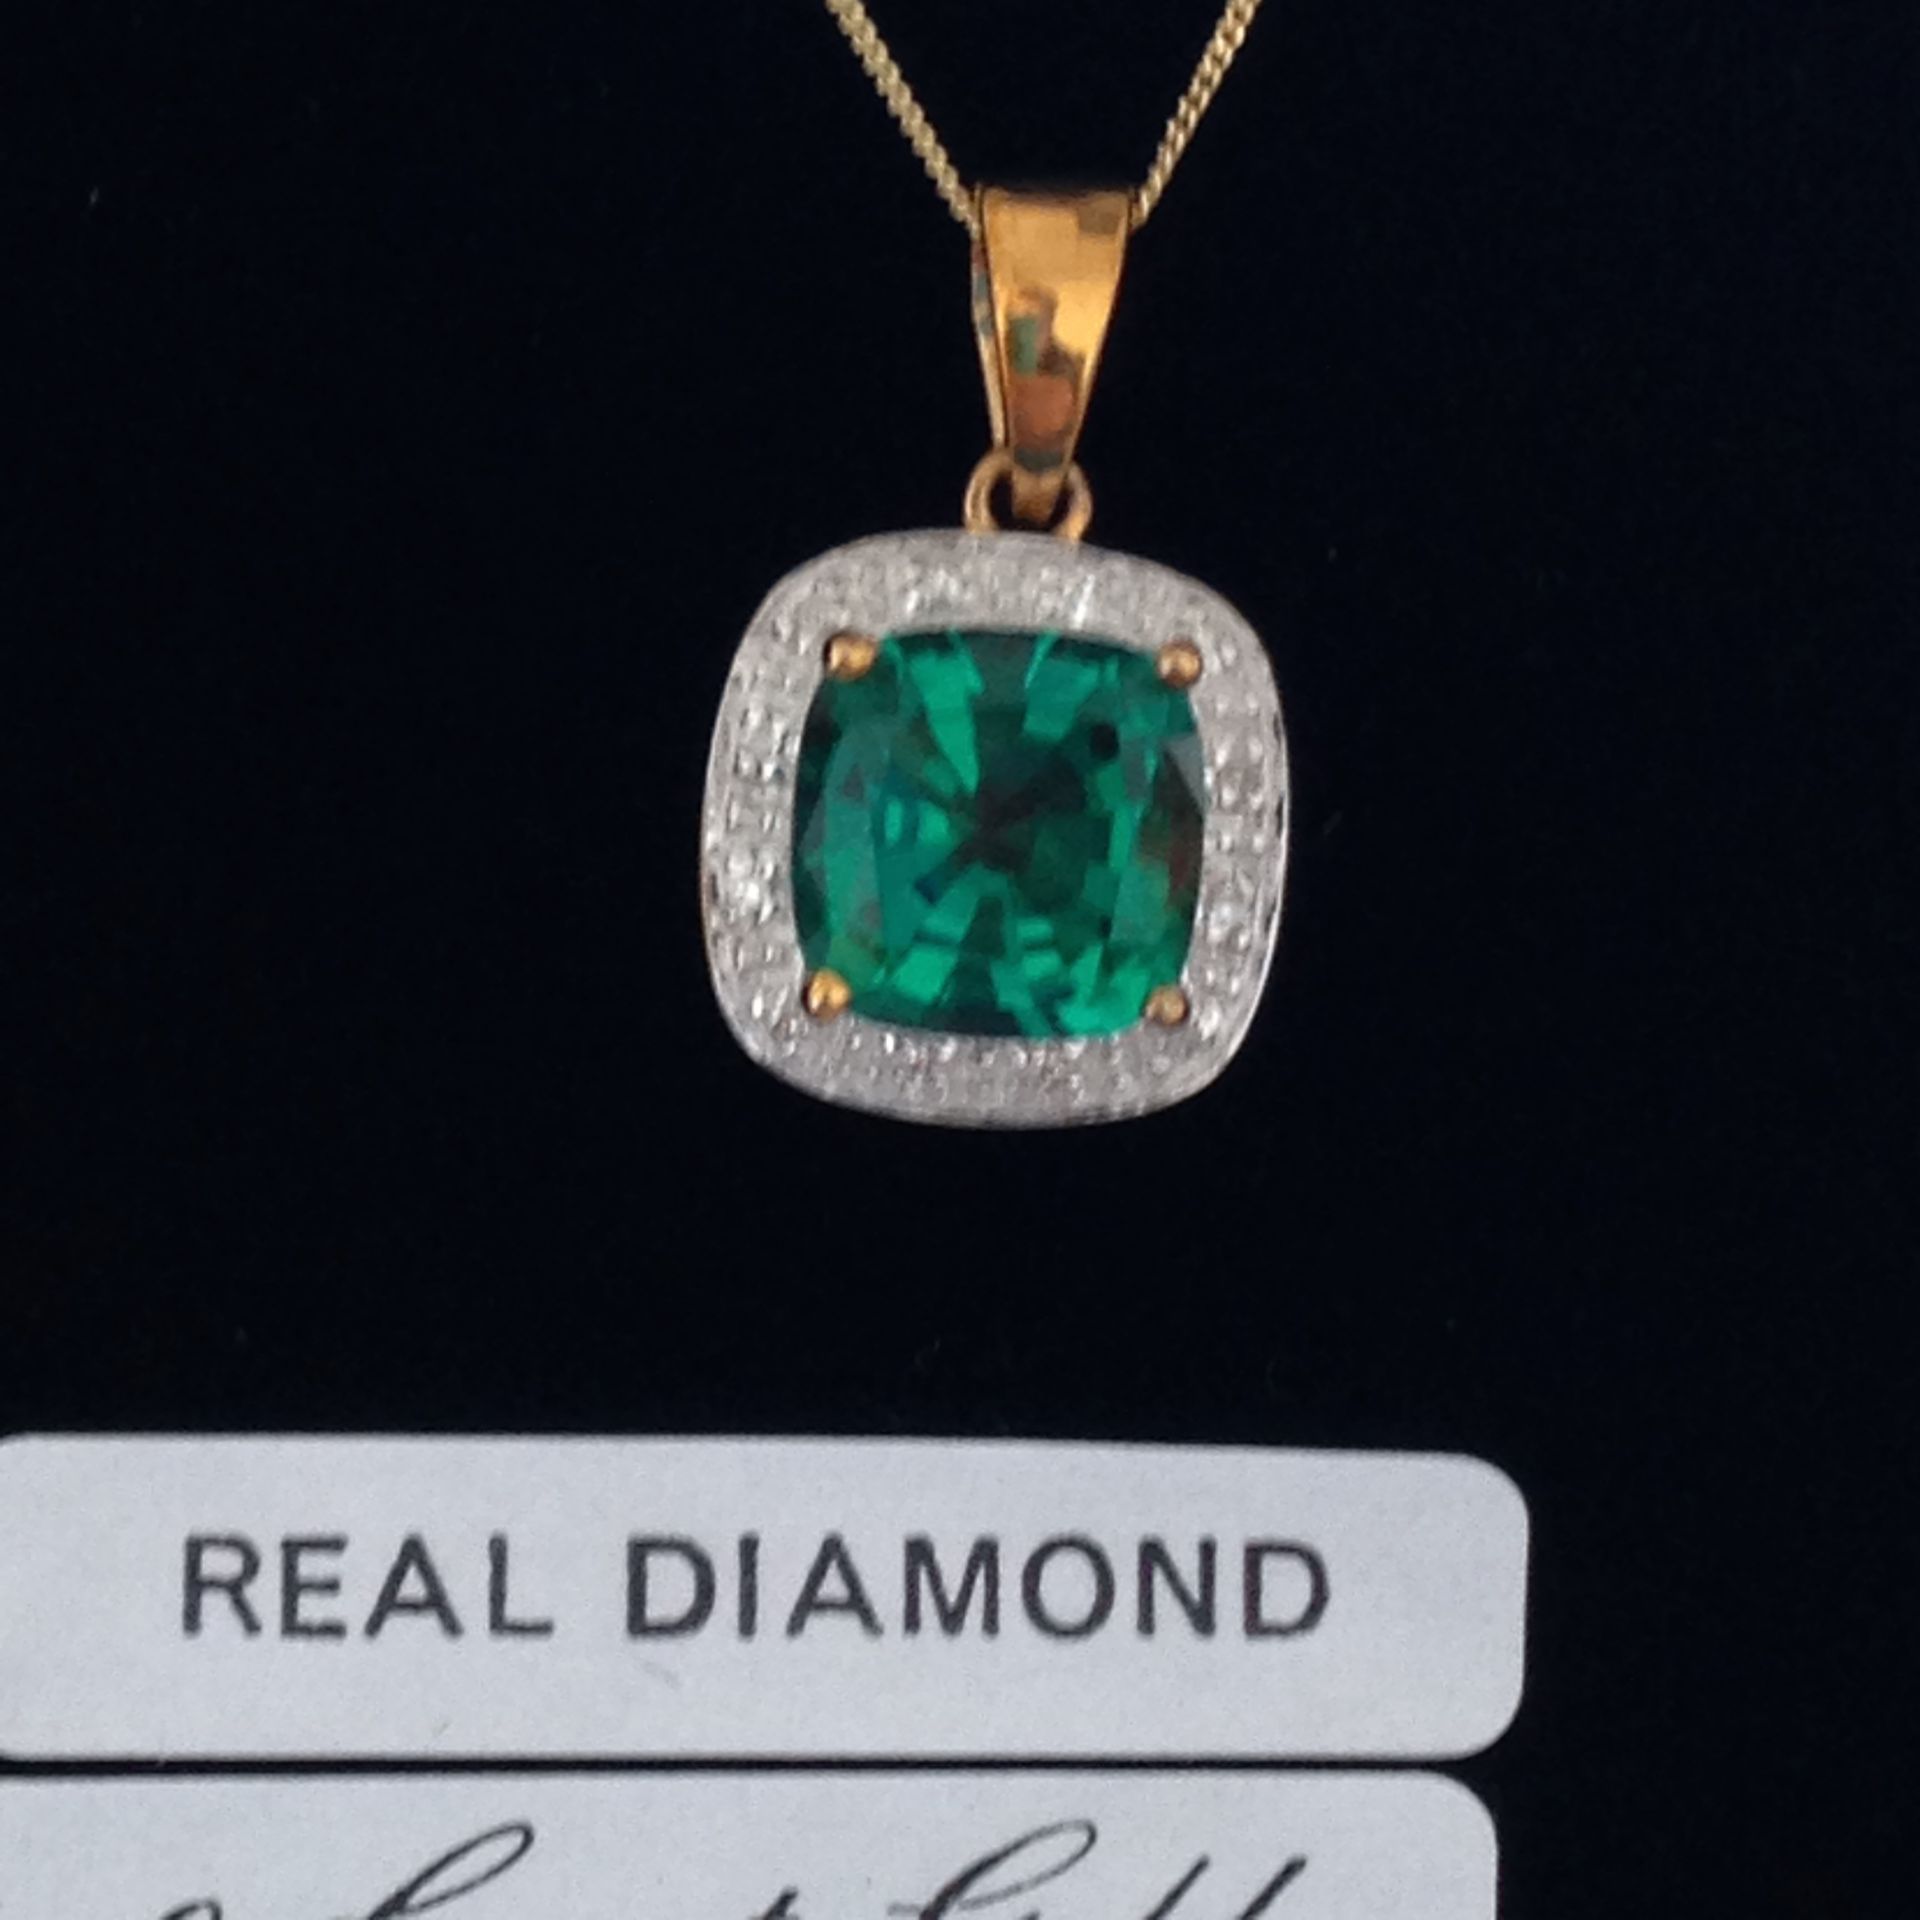 9ct Gold Pendent Necklace with Green Stone with Diamonds - Image 2 of 3